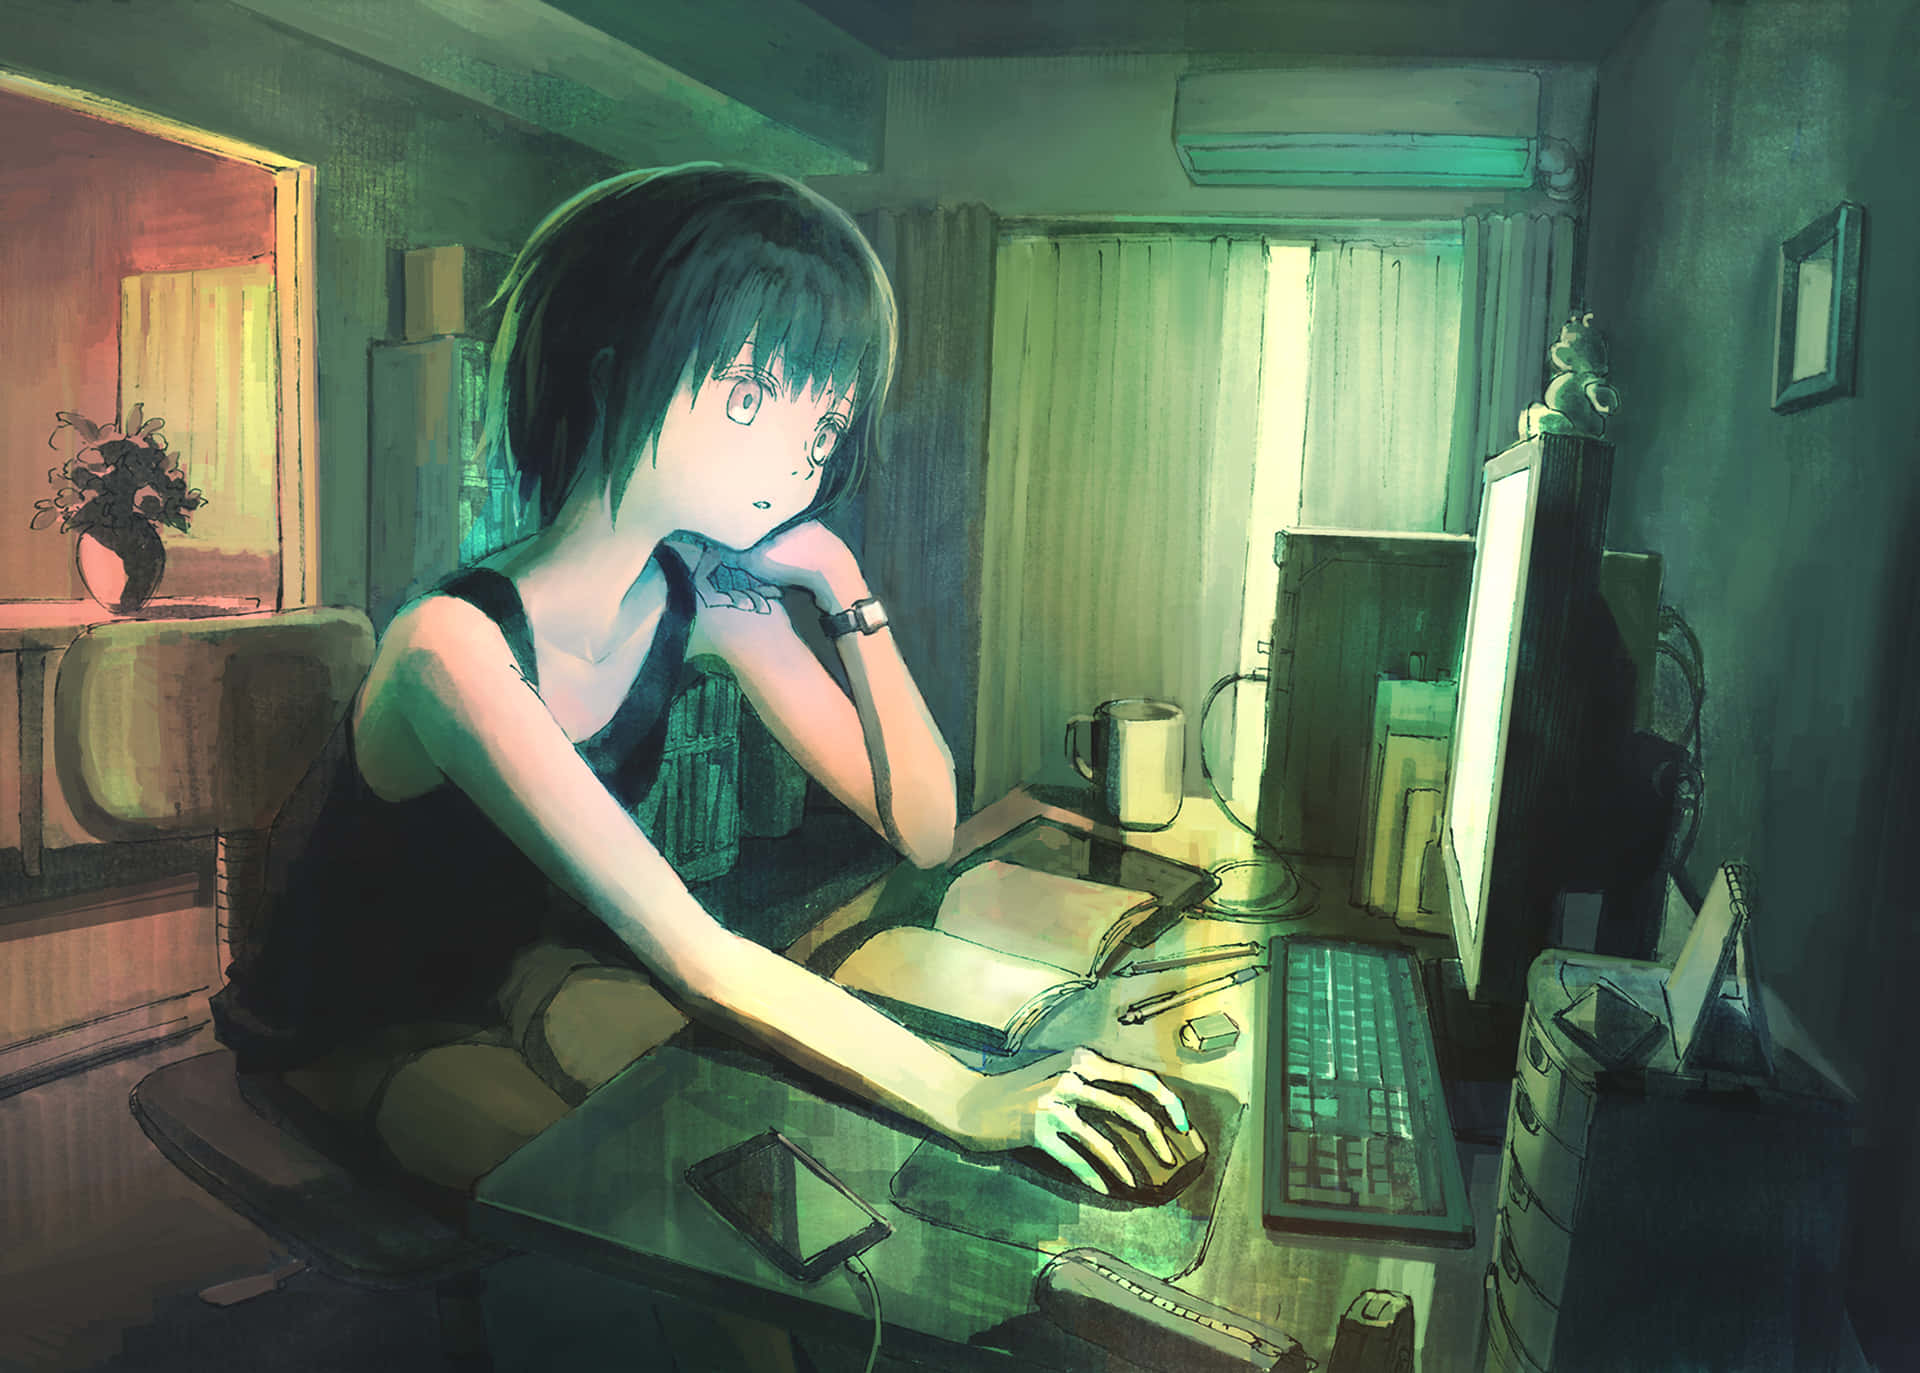 An anime boy sits in front of a computer dreaming of a better world. Wallpaper